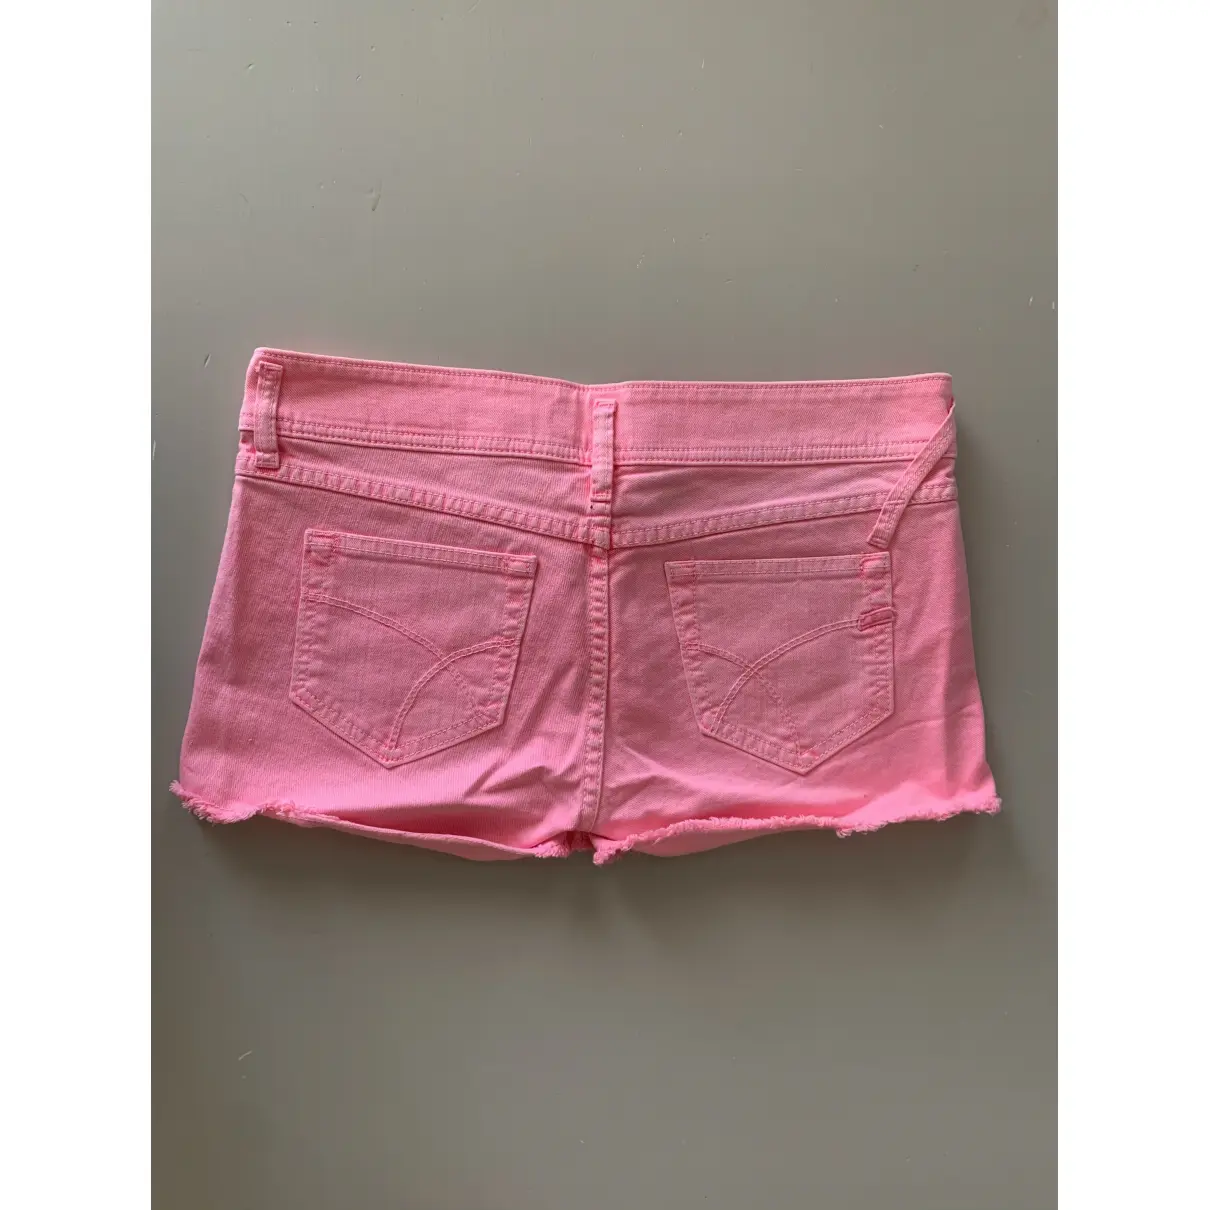 Buy Gas Pink Cotton Shorts online